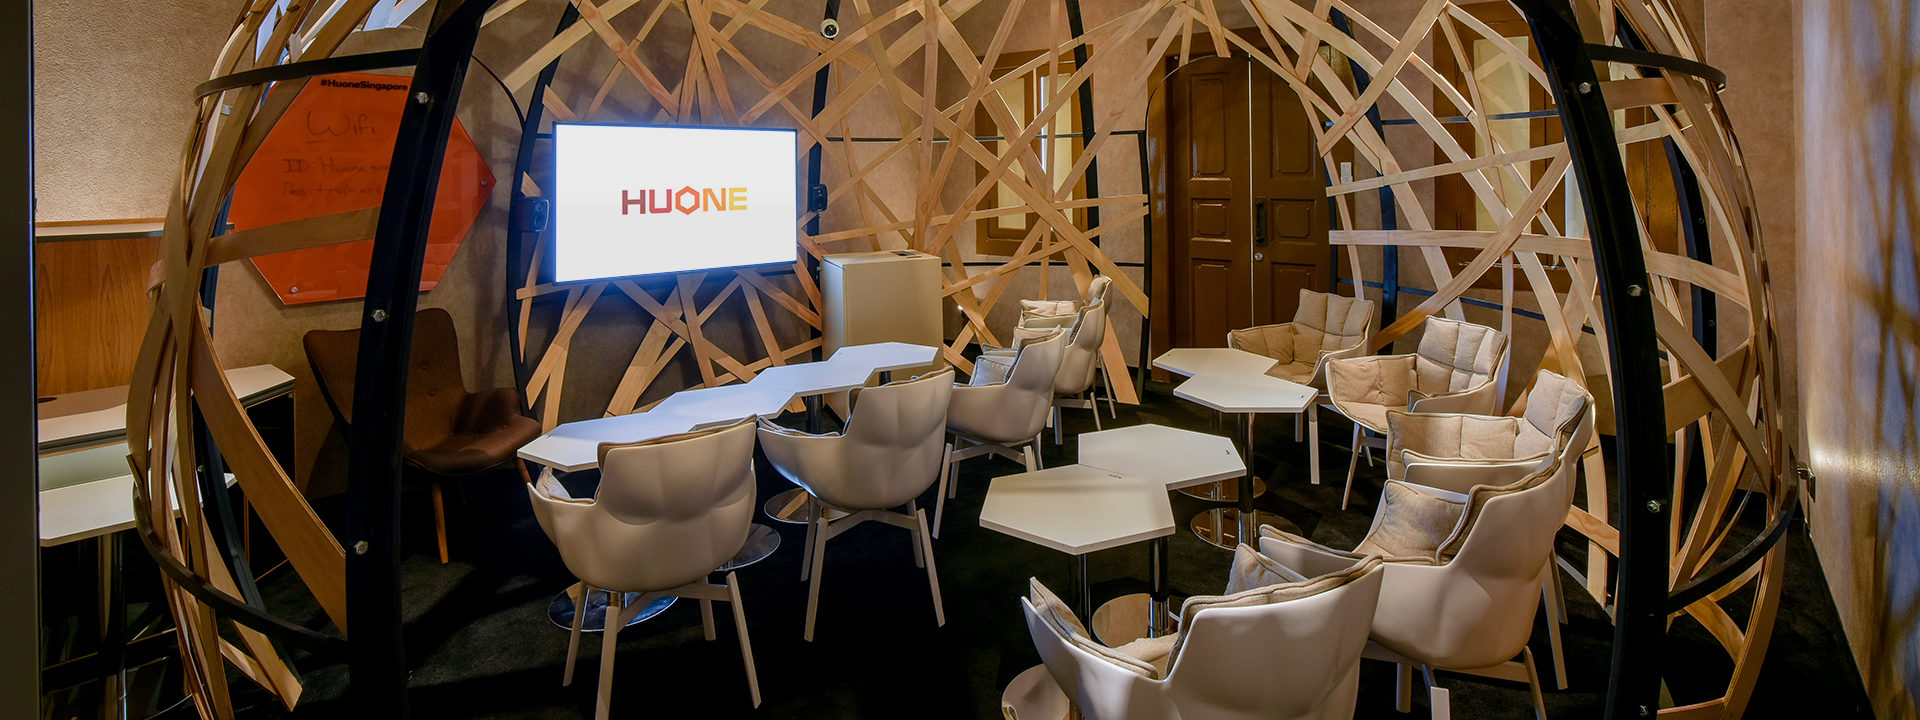 huone-singapore-conference-room-nest